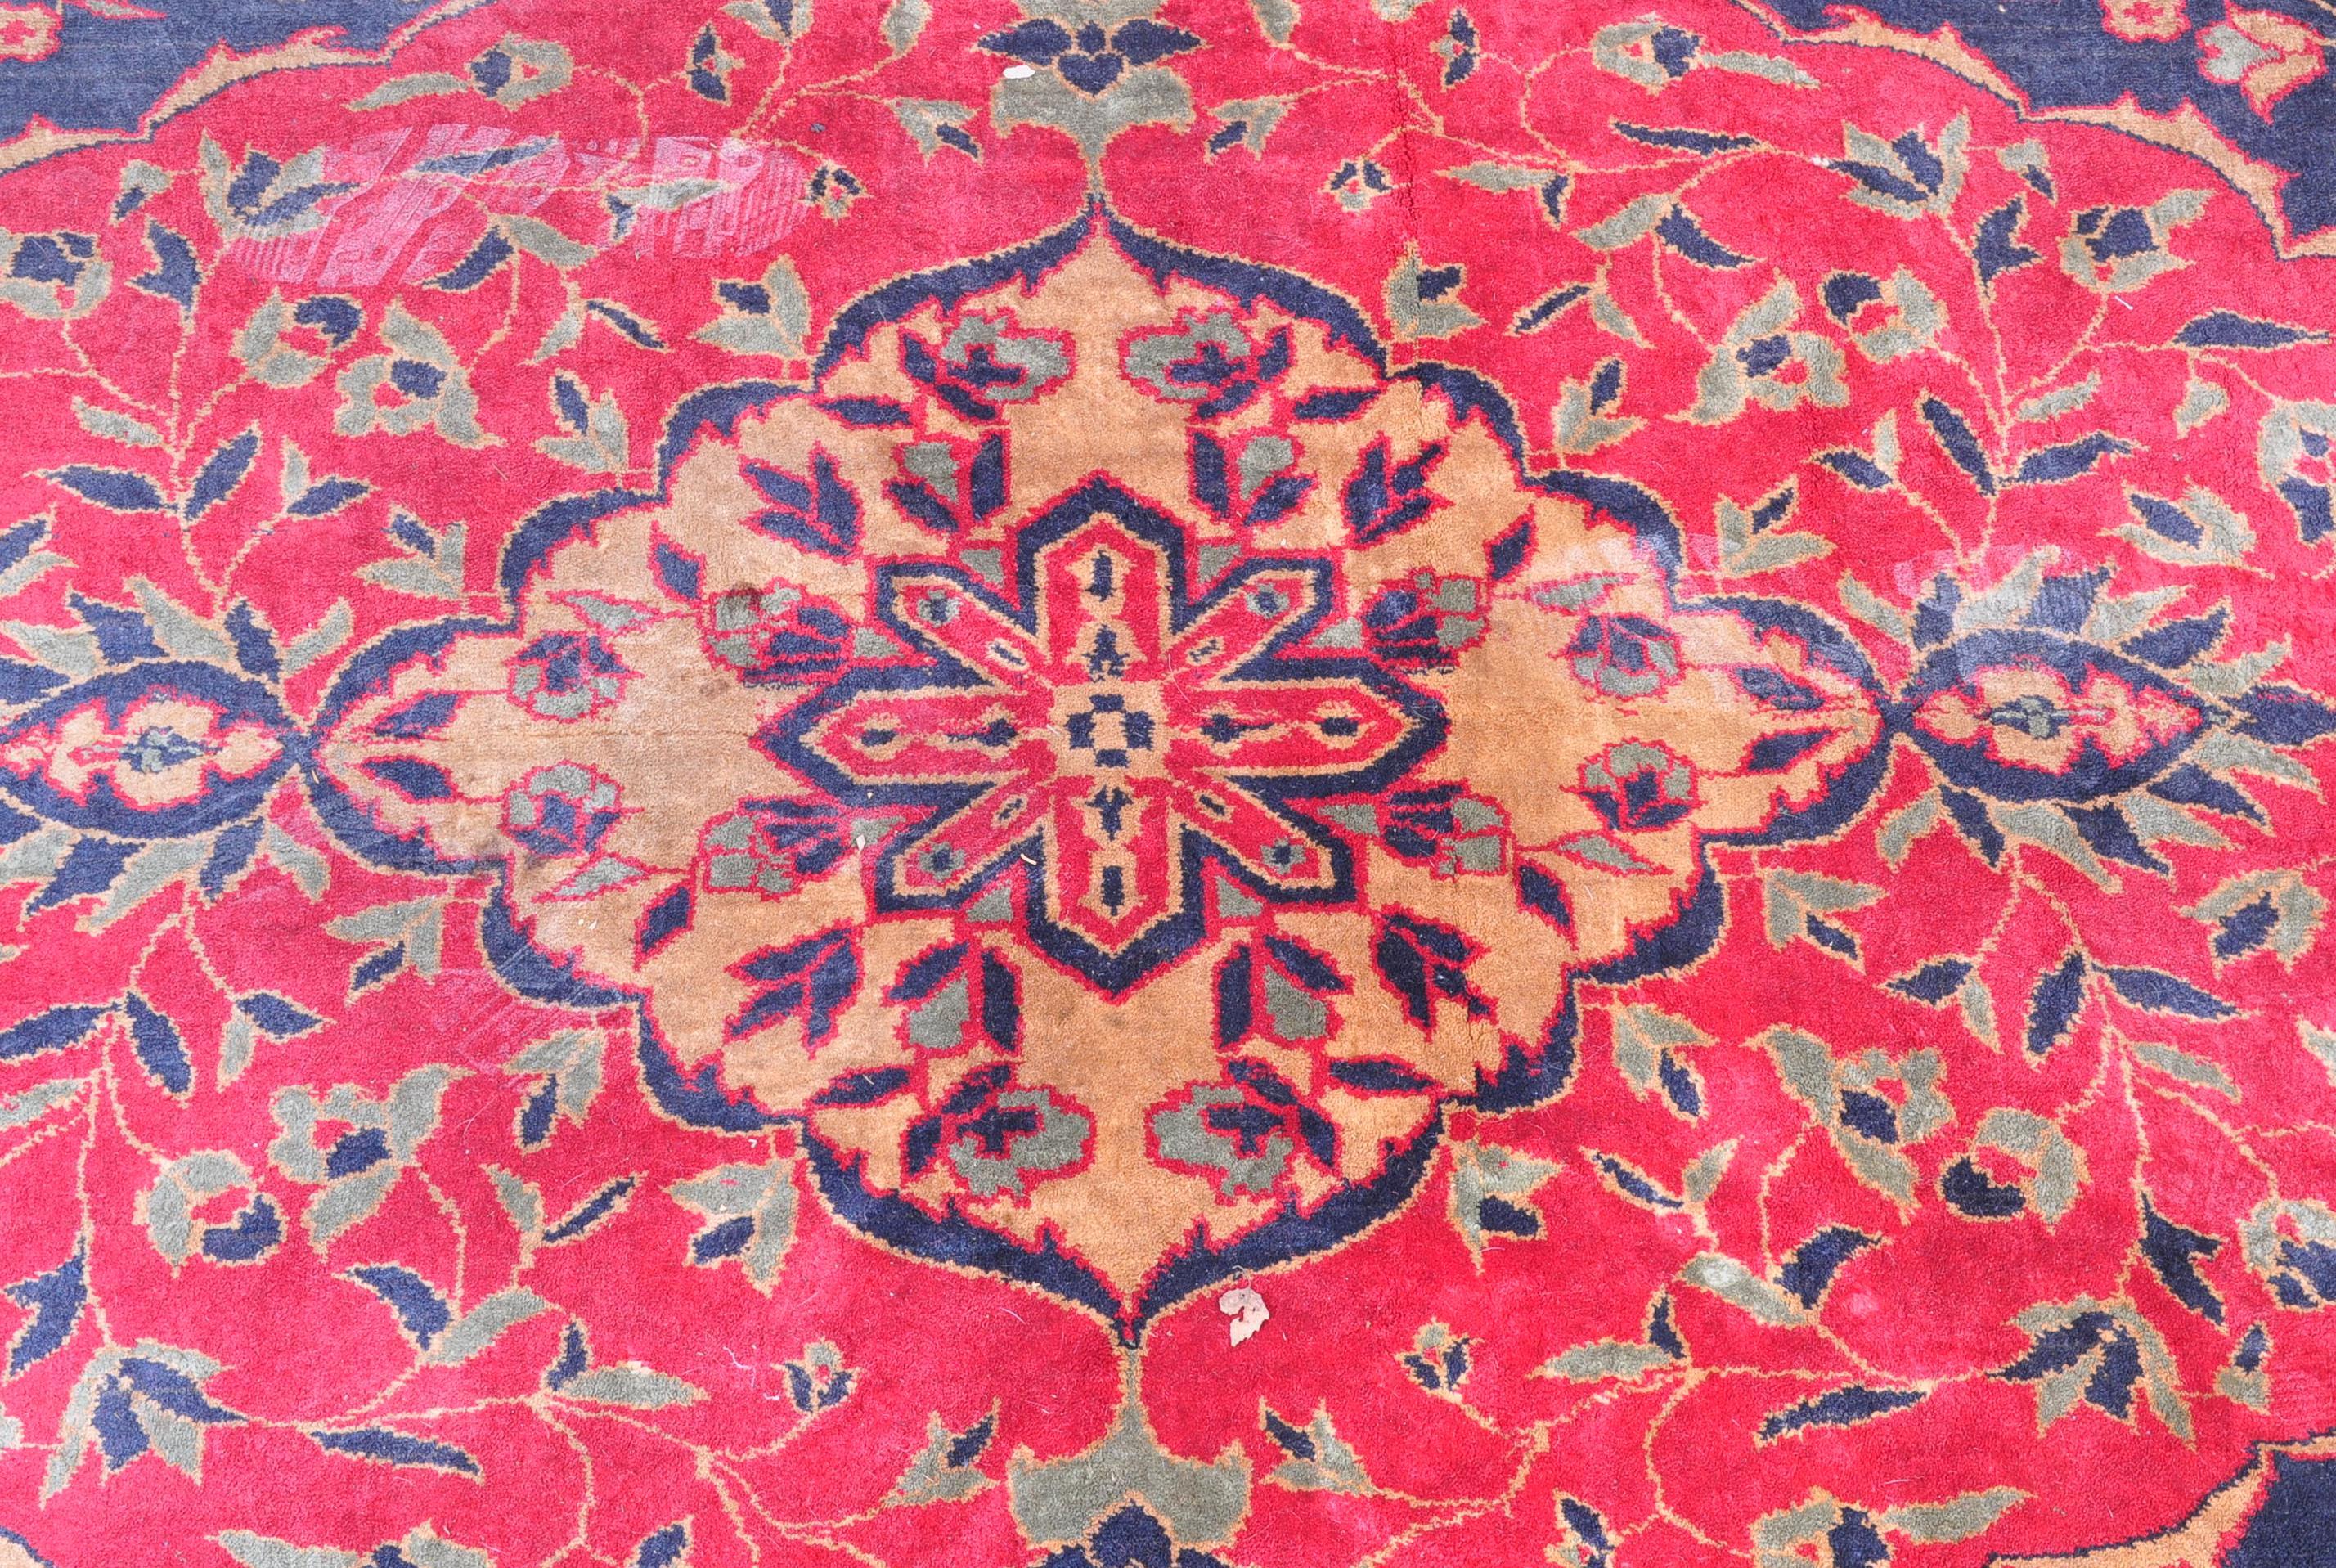 20TH CENTURY HAND KNOTTED WOOL ON WOOL PERSIAN CARPET RUG - Image 2 of 5